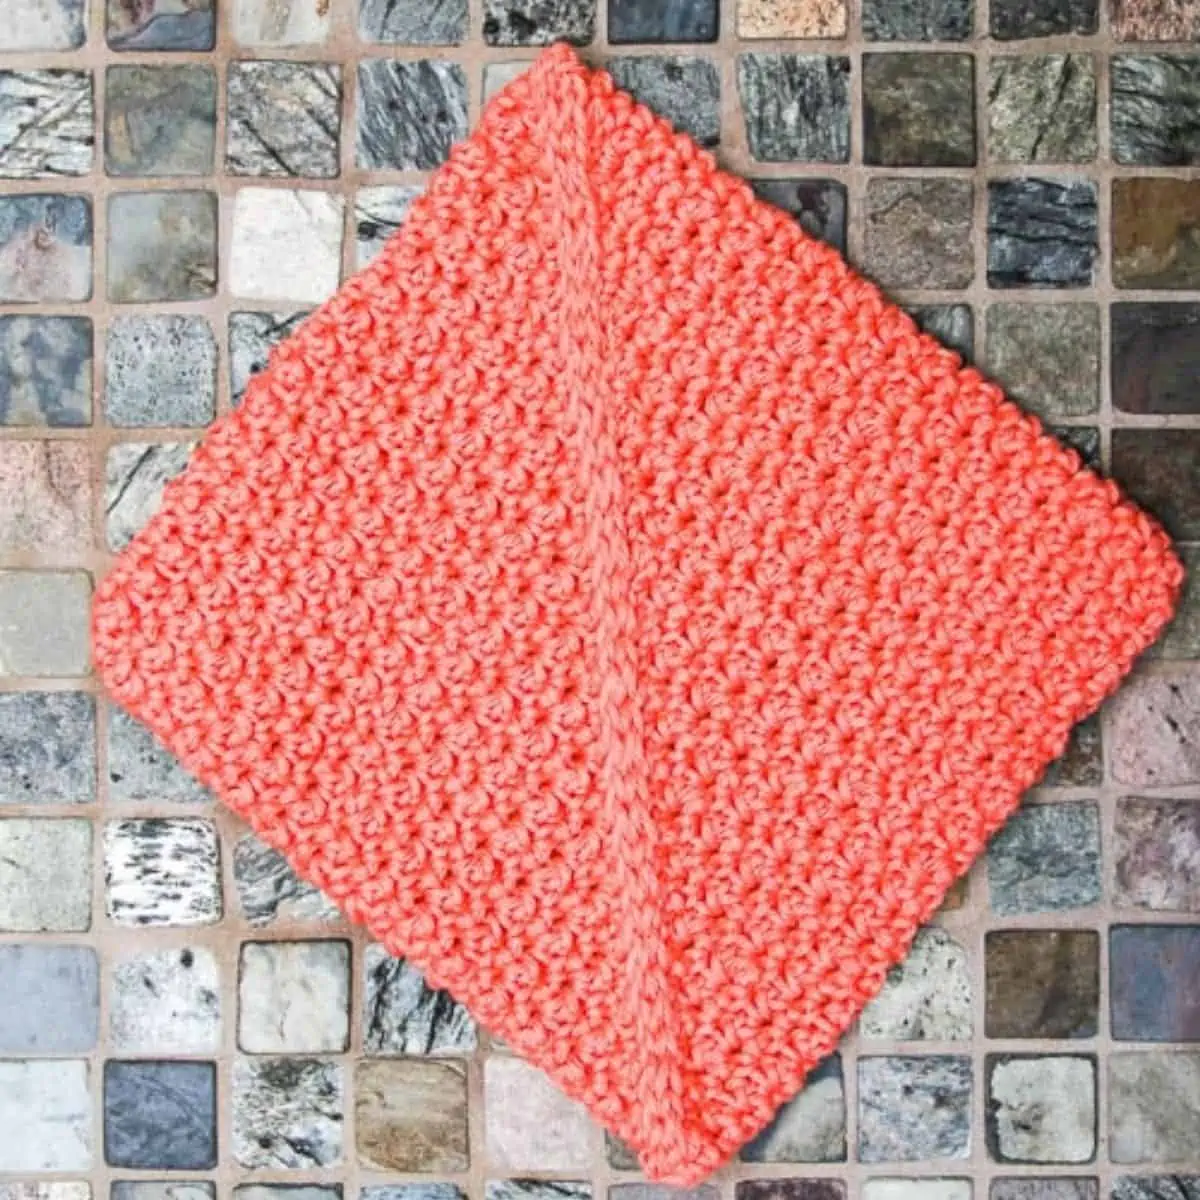 coral colored crochet potholder with a seam down the middle laying flat on tile